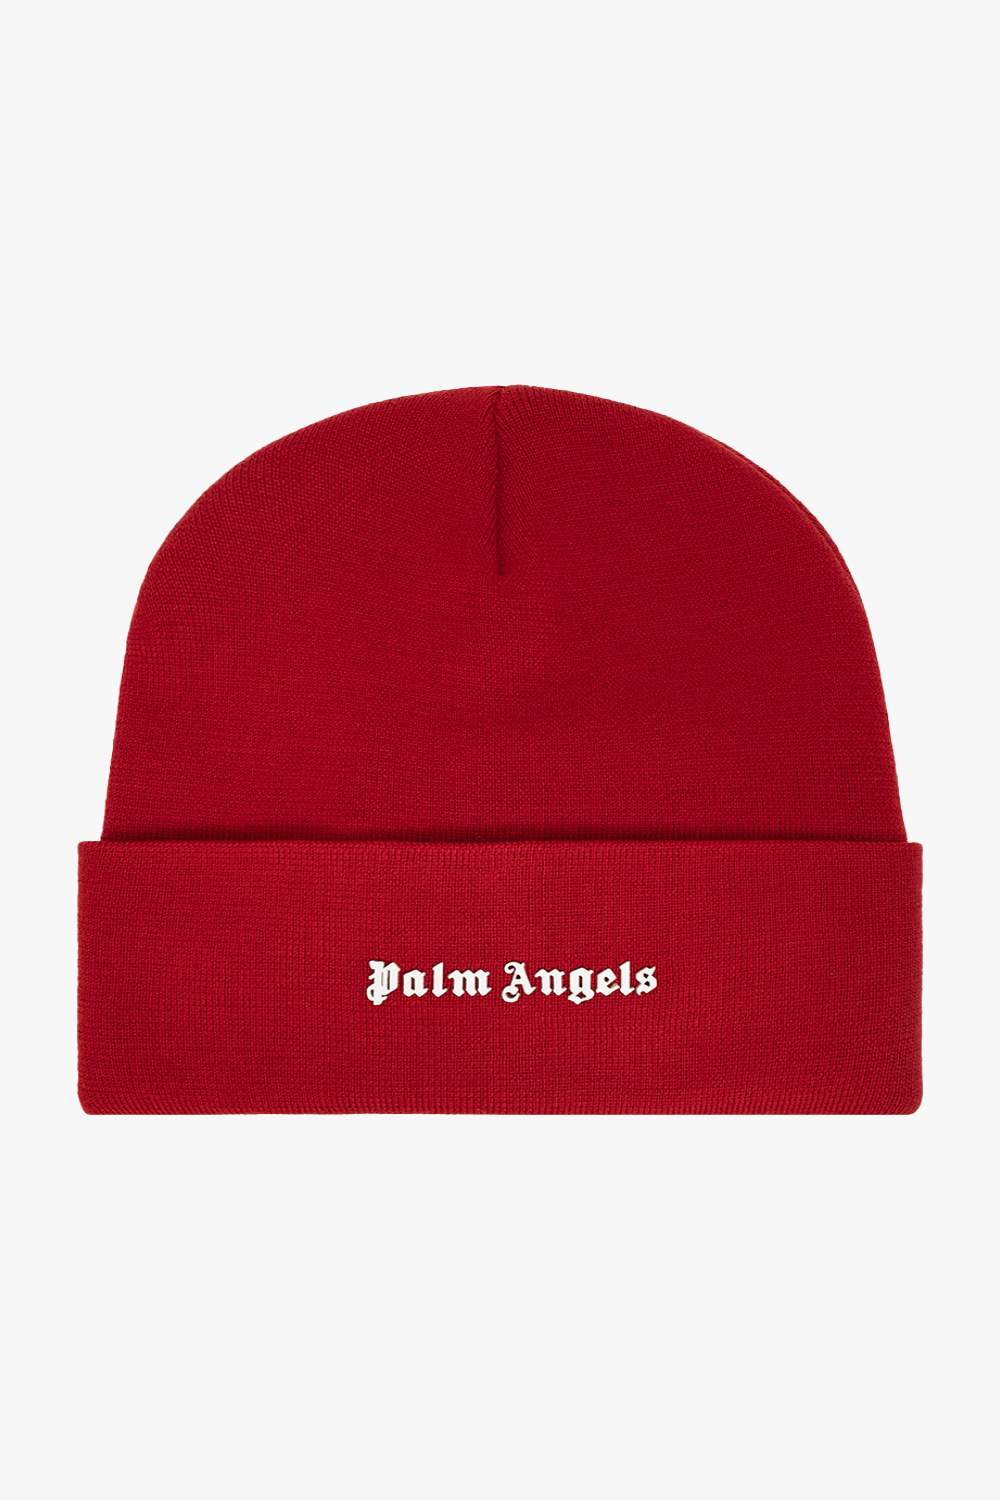 Palm Angels get the app